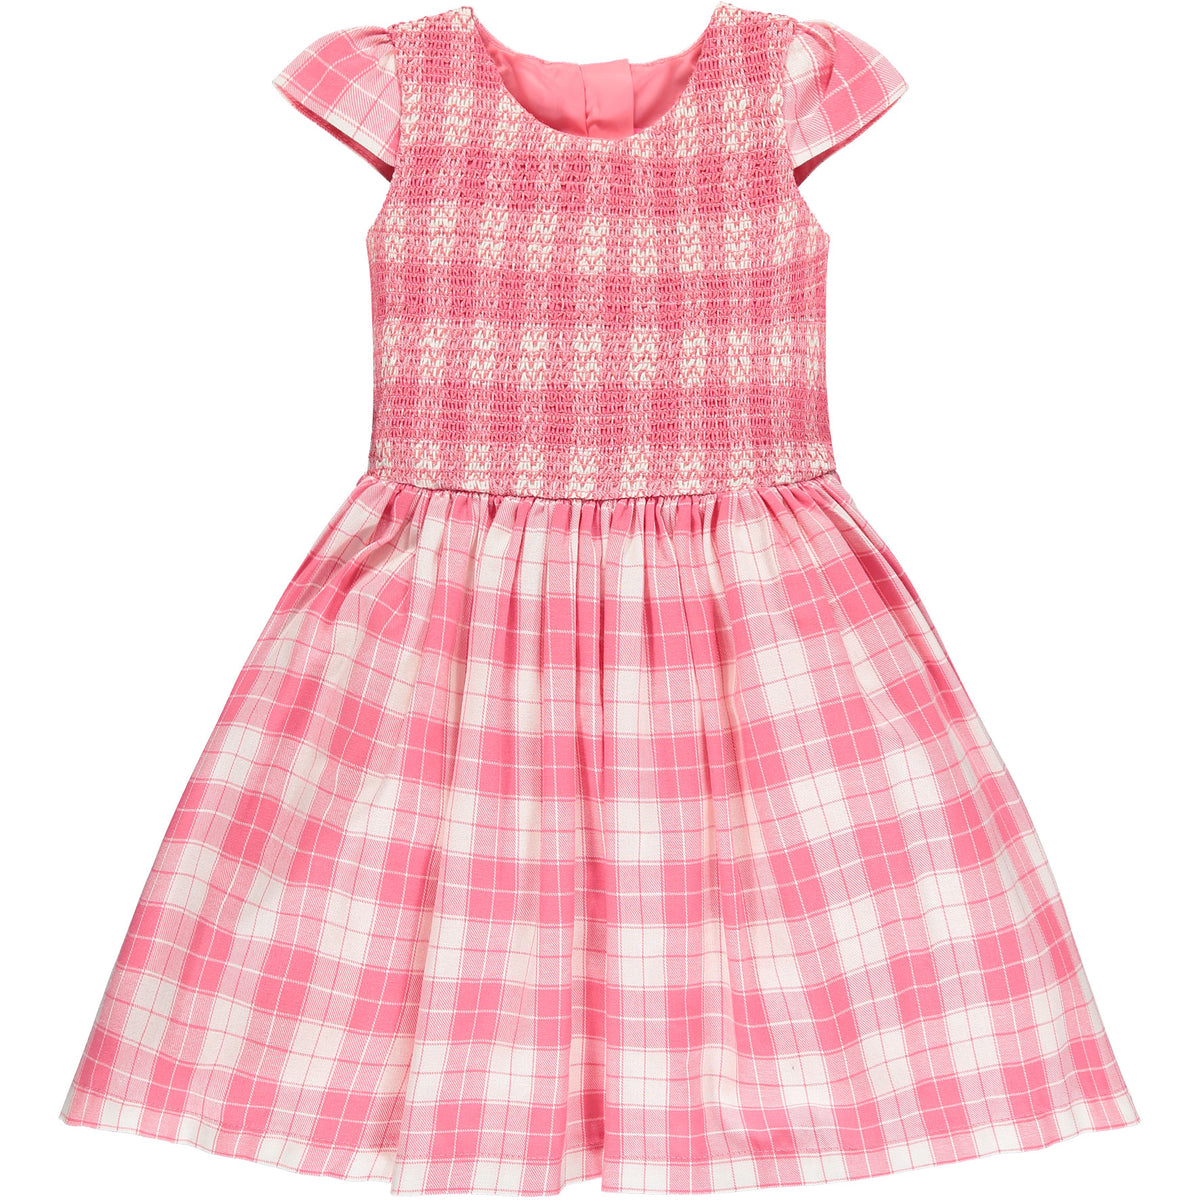 Bonnie Plaid Cotton Smocked Baby Party Dress Pink | Holly Hastie London